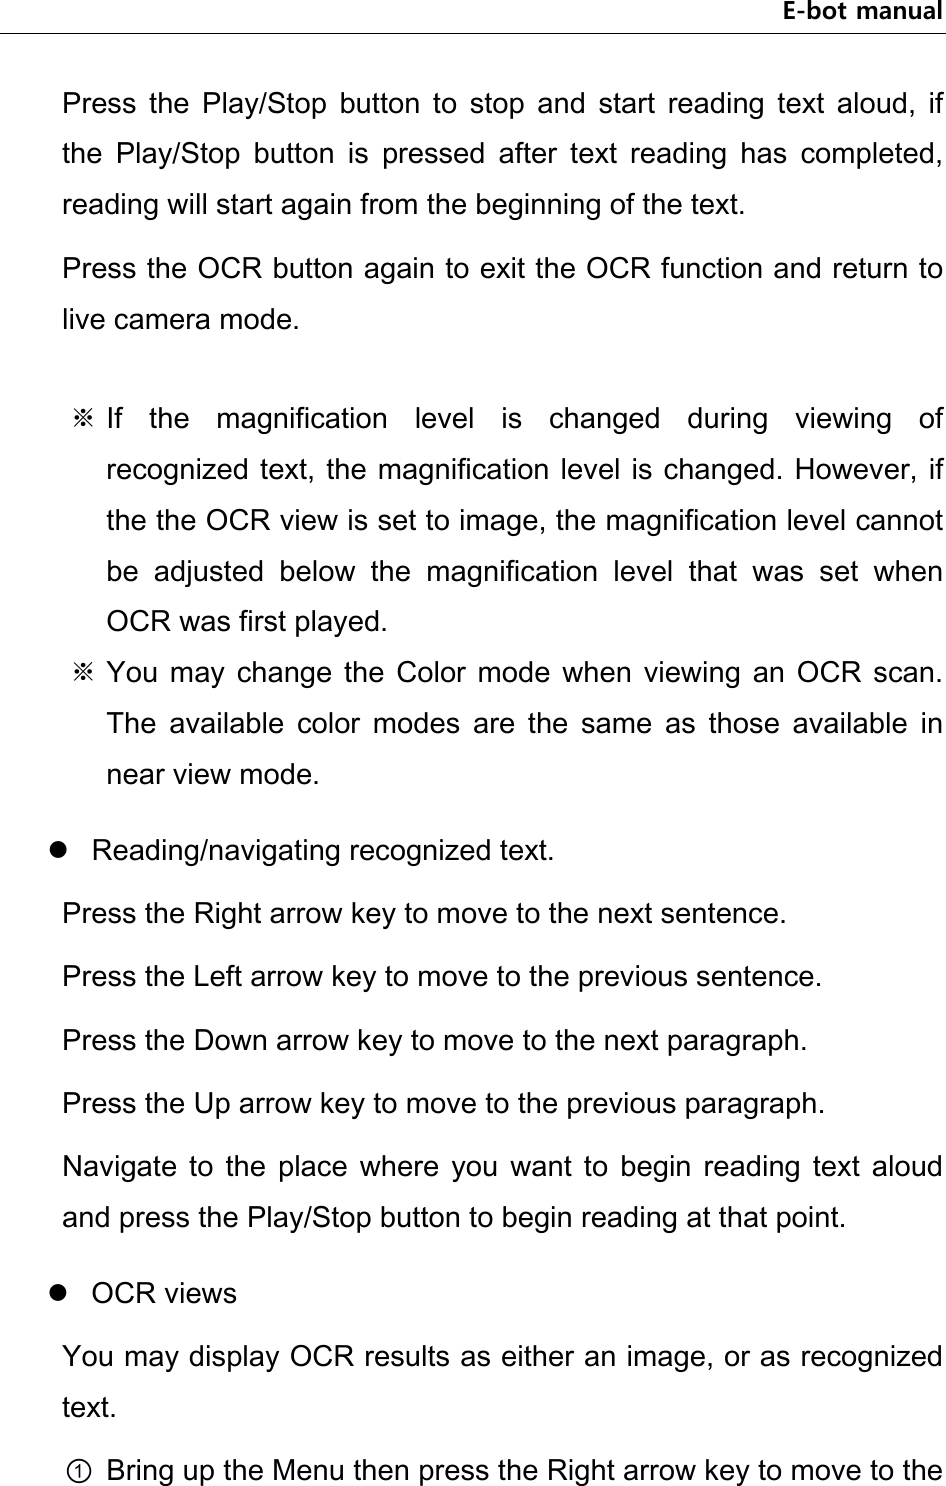 E-bot manual Press  the  Play/Stop  button  to  stop  and  start  reading  text  aloud,  if the  Play/Stop  button  is  pressed  after  text  reading  has  completed, reading will start again from the beginning of the text. Press the OCR button again to exit the OCR function and return to live camera mode.  ※ If  the  magnification  level  is  changed  during  viewing  of recognized text, the magnification level is changed. However, if the the OCR view is set to image, the magnification level cannot be  adjusted  below  the  magnification  level  that  was  set  when OCR was first played. ※ You  may  change the  Color  mode  when  viewing  an  OCR  scan. The  available  color  modes  are  the  same  as  those  available  in near view mode.  Reading/navigating recognized text. Press the Right arrow key to move to the next sentence.   Press the Left arrow key to move to the previous sentence.   Press the Down arrow key to move to the next paragraph. Press the Up arrow key to move to the previous paragraph. Navigate  to  the  place  where  you  want  to  begin  reading  text  aloud and press the Play/Stop button to begin reading at that point.  OCR views You may display OCR results as either an image, or as recognized text. ① Bring up the Menu then press the Right arrow key to move to the 